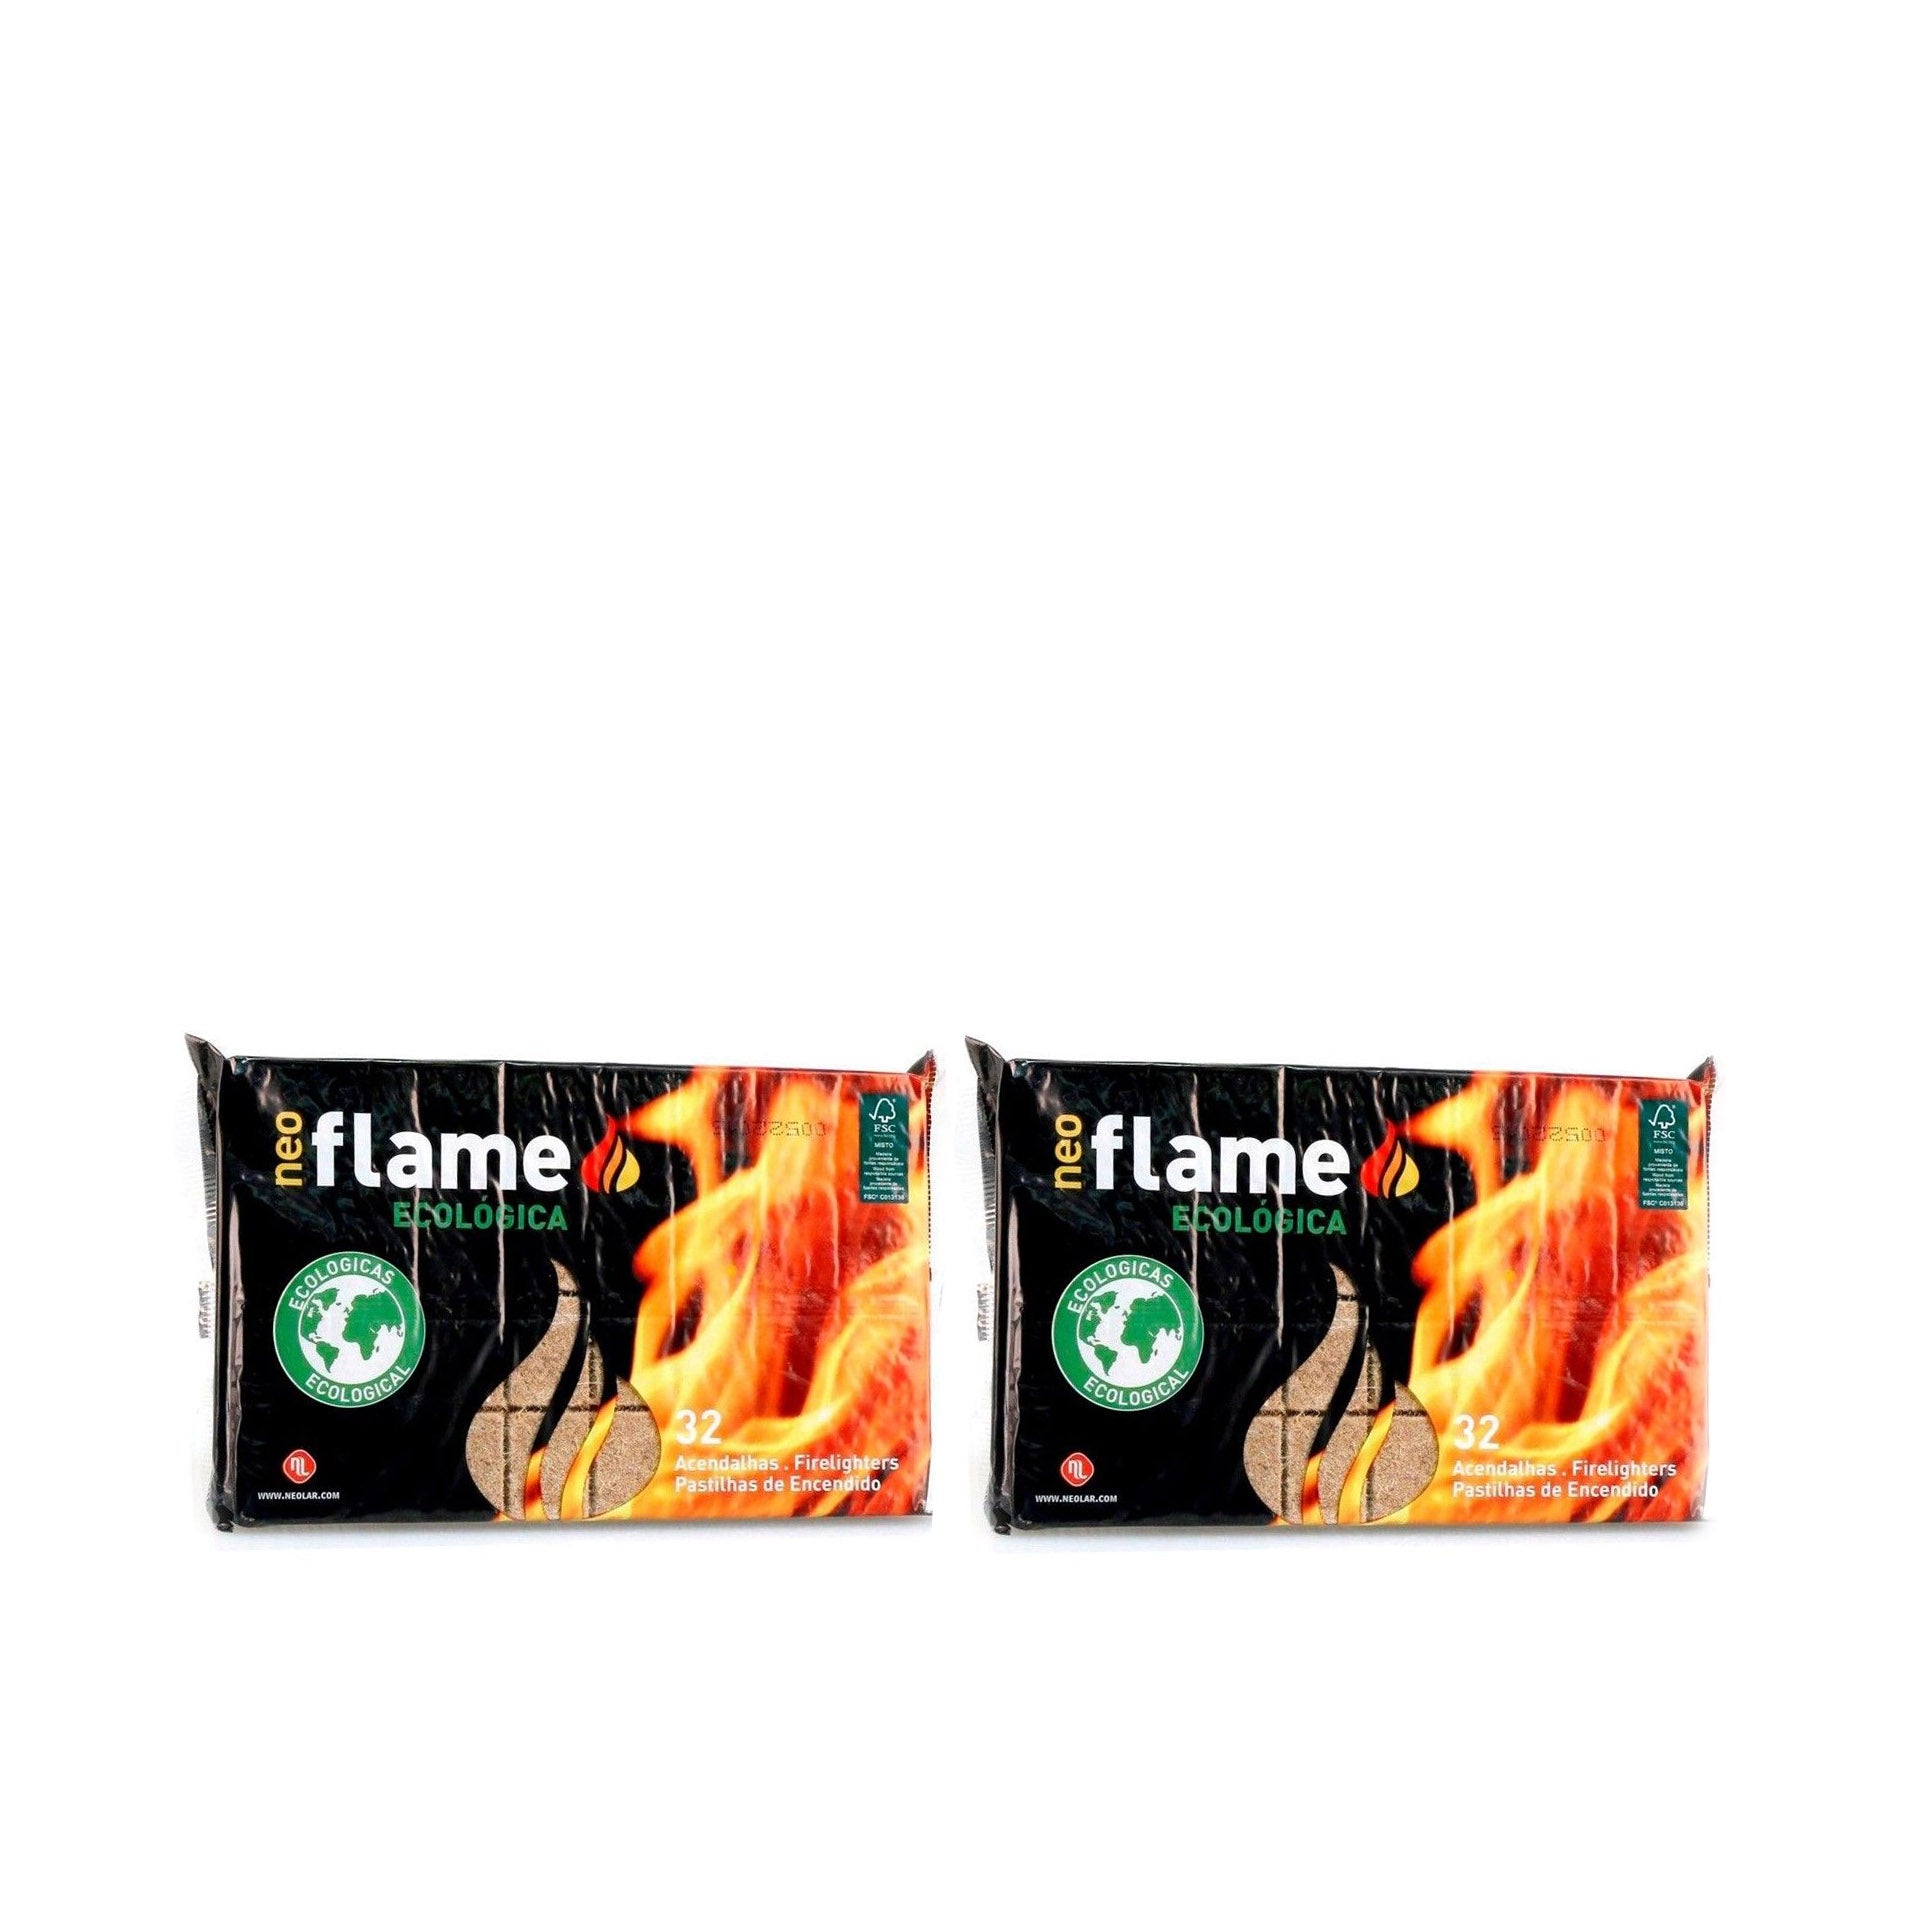 Flamefast Acendalha Eco Neoflame 32 cubos - Pack 2 x 32 cubos